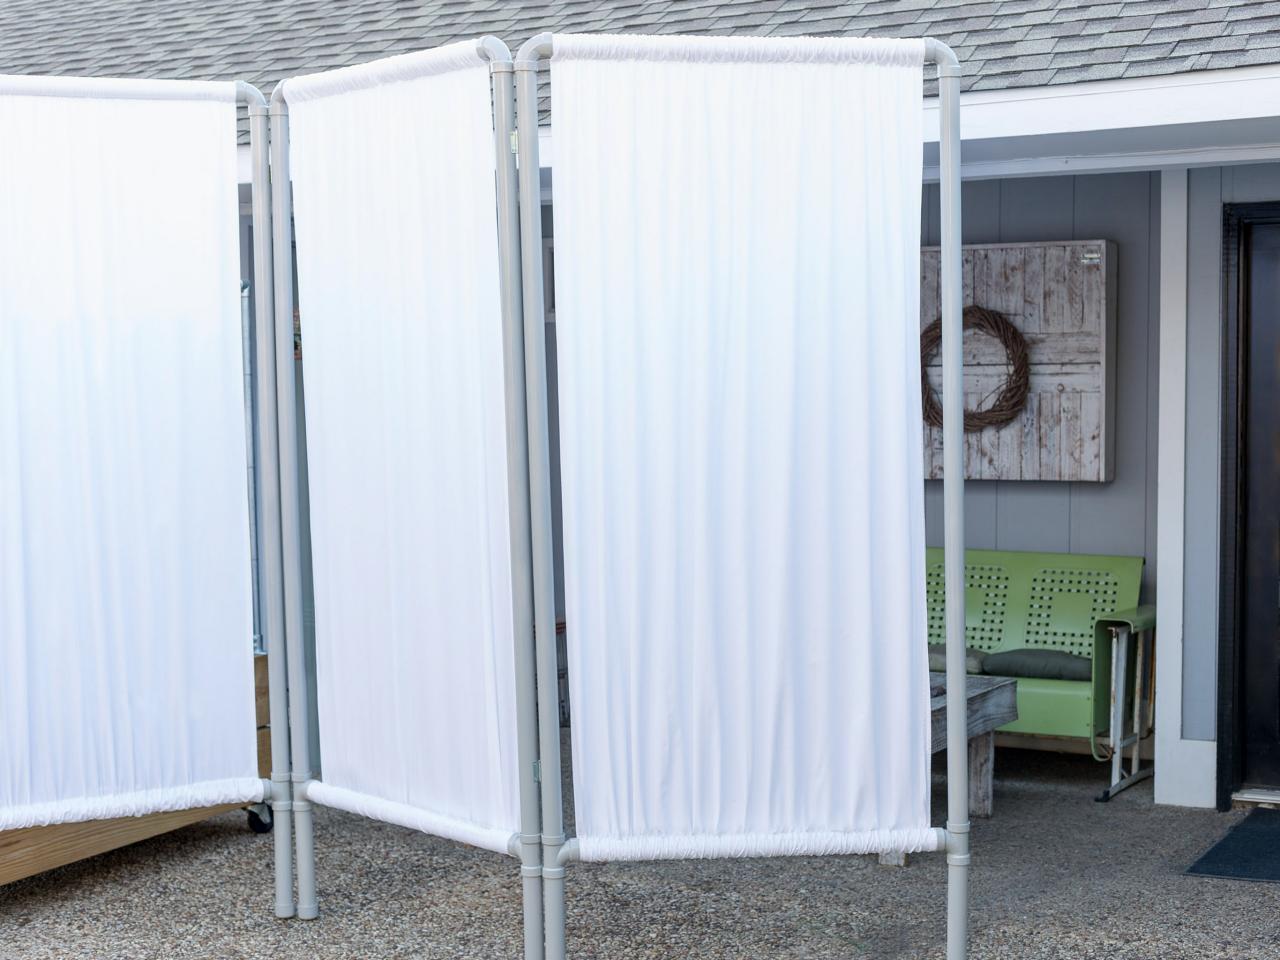 Outdoor Privacy Screen From Pvc Pipe, How To Make An Outdoor Privacy Screen From Pvc Pipe